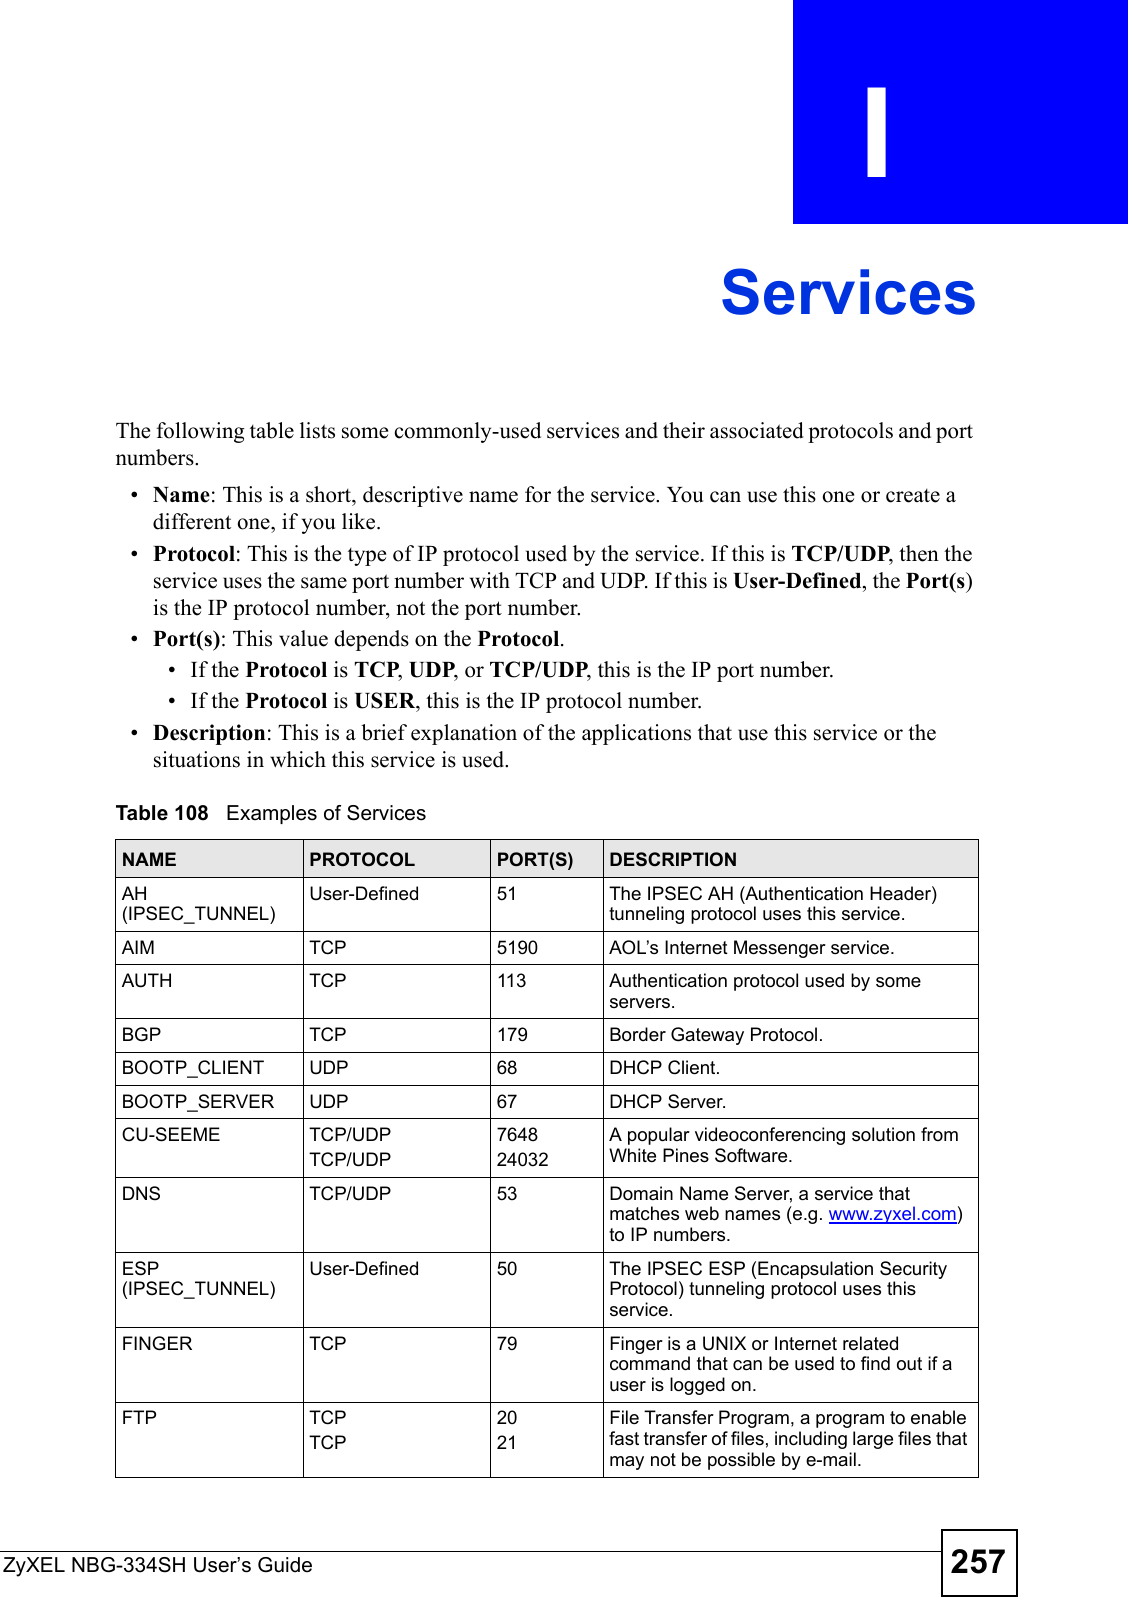 ZyXEL NBG-334SH User’s Guide 257APPENDIX  I ServicesThe following table lists some commonly-used services and their associated protocols and port numbers.•Name: This is a short, descriptive name for the service. You can use this one or create a different one, if you like.•Protocol: This is the type of IP protocol used by the service. If this is TCP/UDP, then the service uses the same port number with TCP and UDP. If this is User-Defined, the Port(s) is the IP protocol number, not the port number.•Port(s): This value depends on the Protocol.• If the Protocol is TCP, UDP, or TCP/UDP, this is the IP port number.• If the Protocol is USER, this is the IP protocol number.•Description: This is a brief explanation of the applications that use this service or the situations in which this service is used.Table 108   Examples of ServicesNAME PROTOCOL PORT(S) DESCRIPTIONAH (IPSEC_TUNNEL)User-Defined 51 The IPSEC AH (Authentication Header) tunneling protocol uses this service.AIM TCP 5190 AOL’s Internet Messenger service.AUTH TCP 113 Authentication protocol used by some servers.BGP TCP 179 Border Gateway Protocol.BOOTP_CLIENT UDP 68 DHCP Client.BOOTP_SERVER UDP 67 DHCP Server.CU-SEEME TCP/UDPTCP/UDP 764824032A popular videoconferencing solution from White Pines Software.DNS TCP/UDP 53 Domain Name Server, a service that matches web names (e.g. www.zyxel.com) to IP numbers.ESP (IPSEC_TUNNEL)User-Defined 50 The IPSEC ESP (Encapsulation Security Protocol) tunneling protocol uses this service.FINGER TCP 79 Finger is a UNIX or Internet related command that can be used to find out if a user is logged on.FTP TCPTCP2021File Transfer Program, a program to enable fast transfer of files, including large files that may not be possible by e-mail.